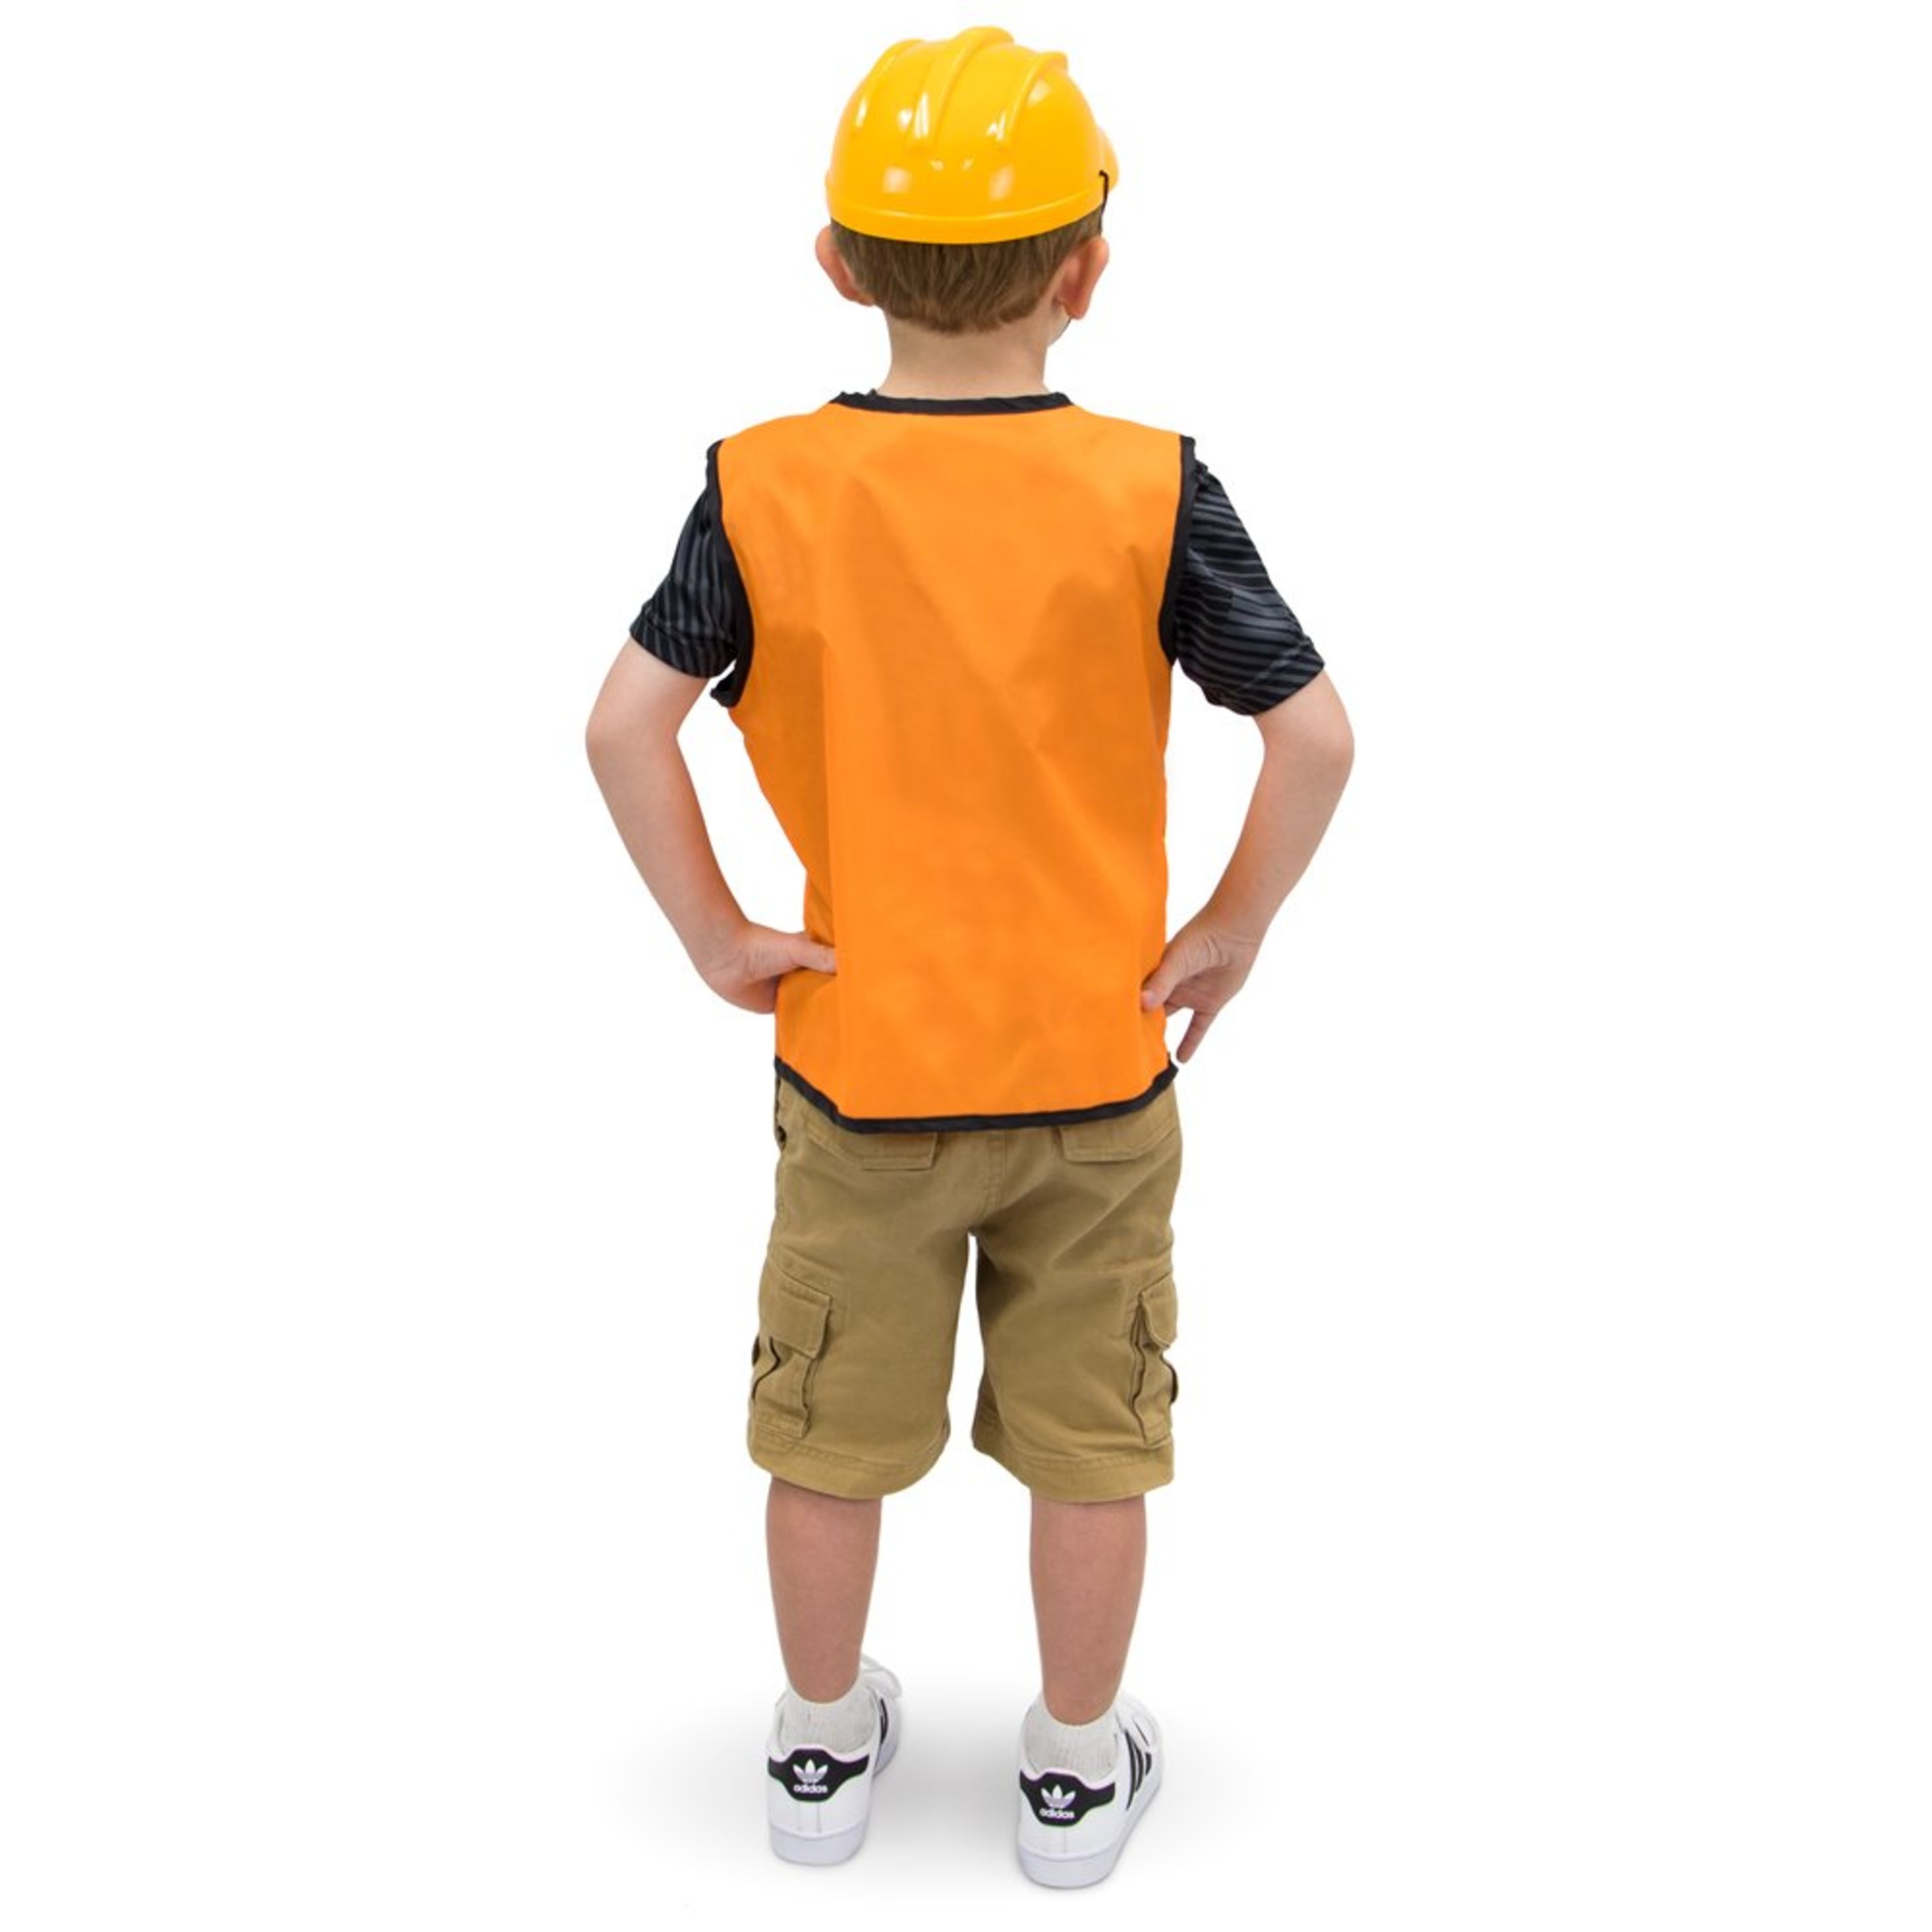 Construction Worker Children's Halloween Dress Up Roleplay Costume YS 3-4 - image 2 of 7